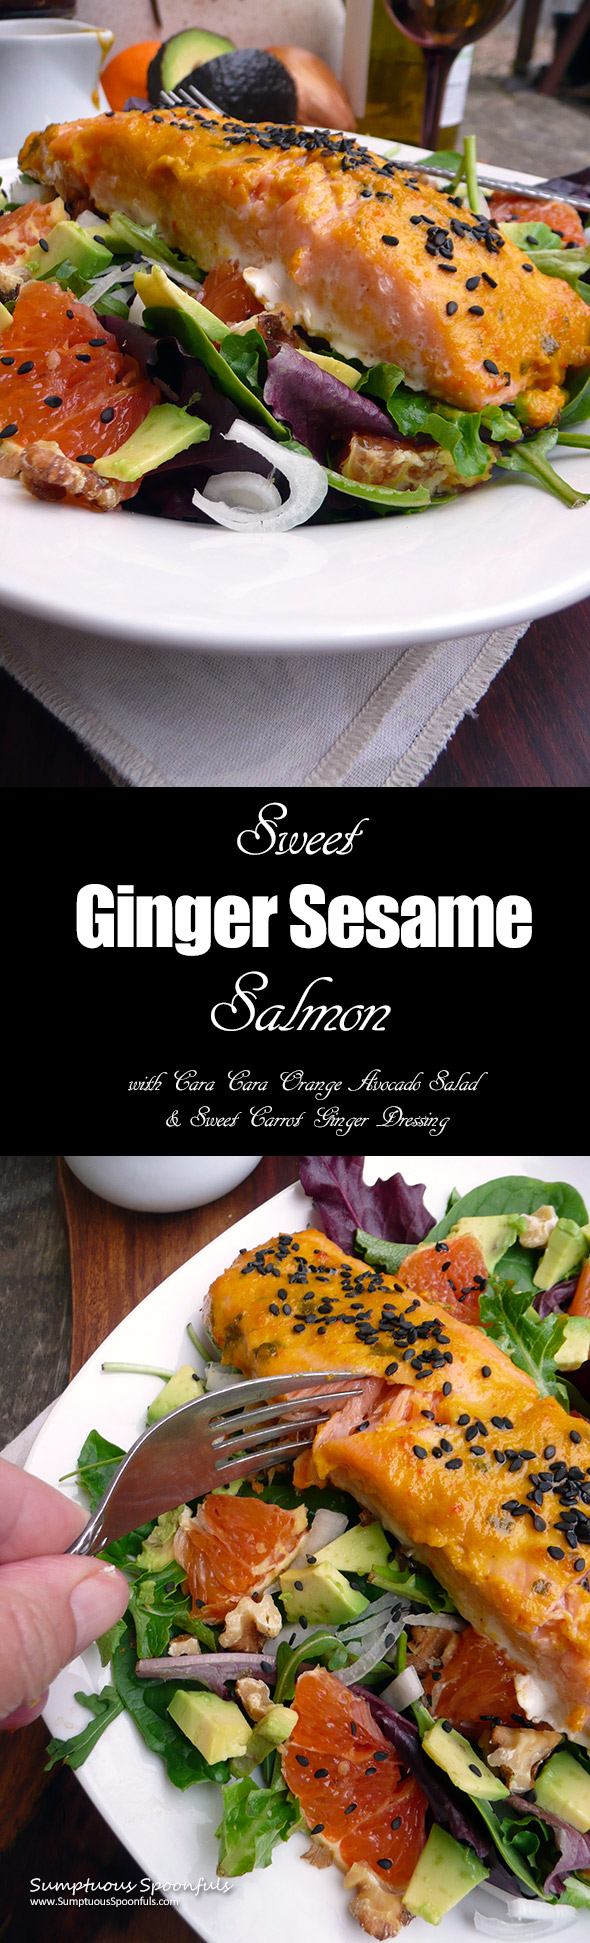 Sweet Ginger Sesame Salmon with Cara Cara Orange Salad ~ bursting with citrus and ginger flavors, this flavorful salmon is ready in minutes!